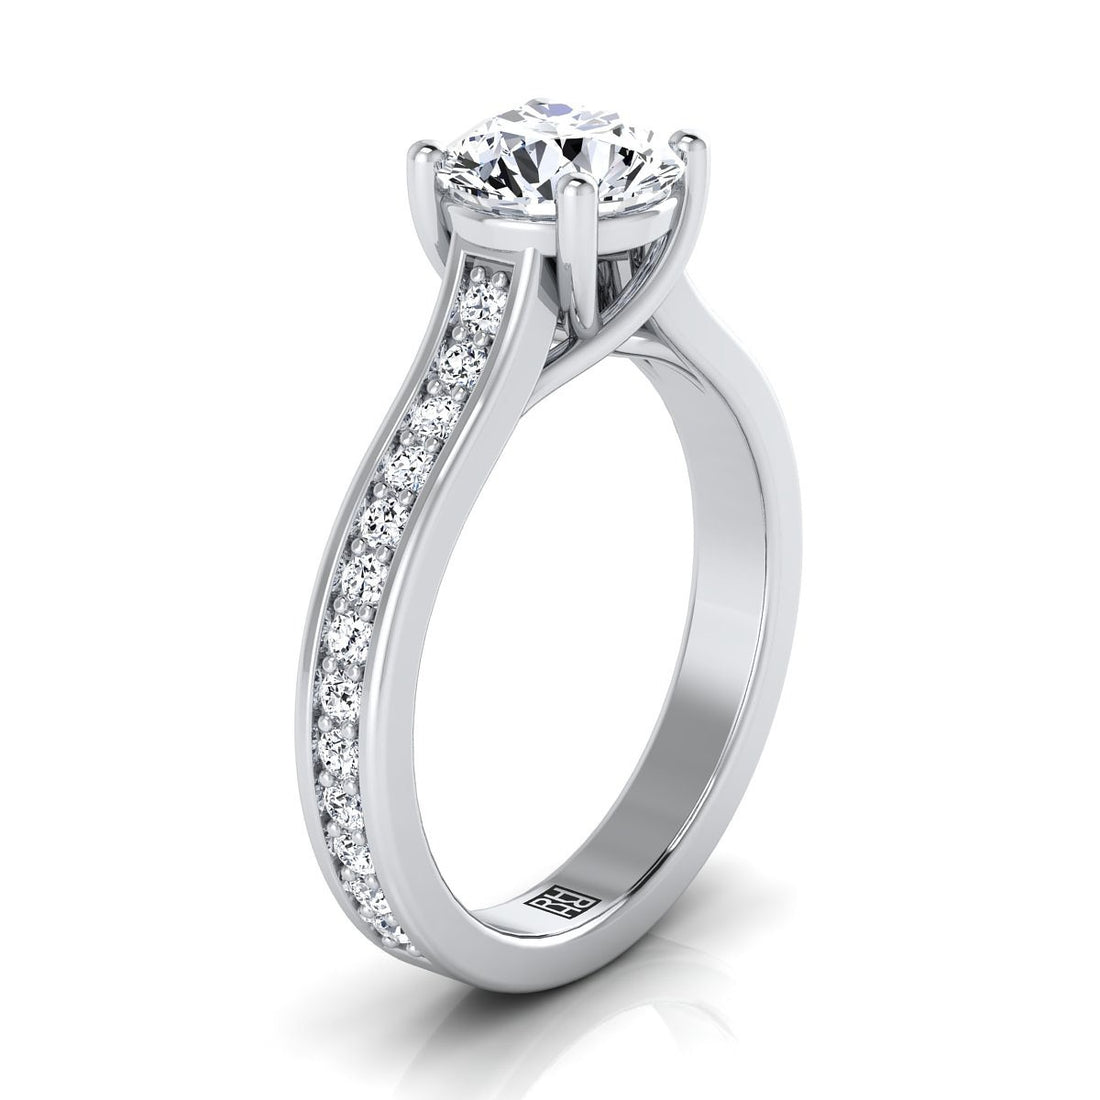 What to Check When Selecting a Channel Set Wedding Ring